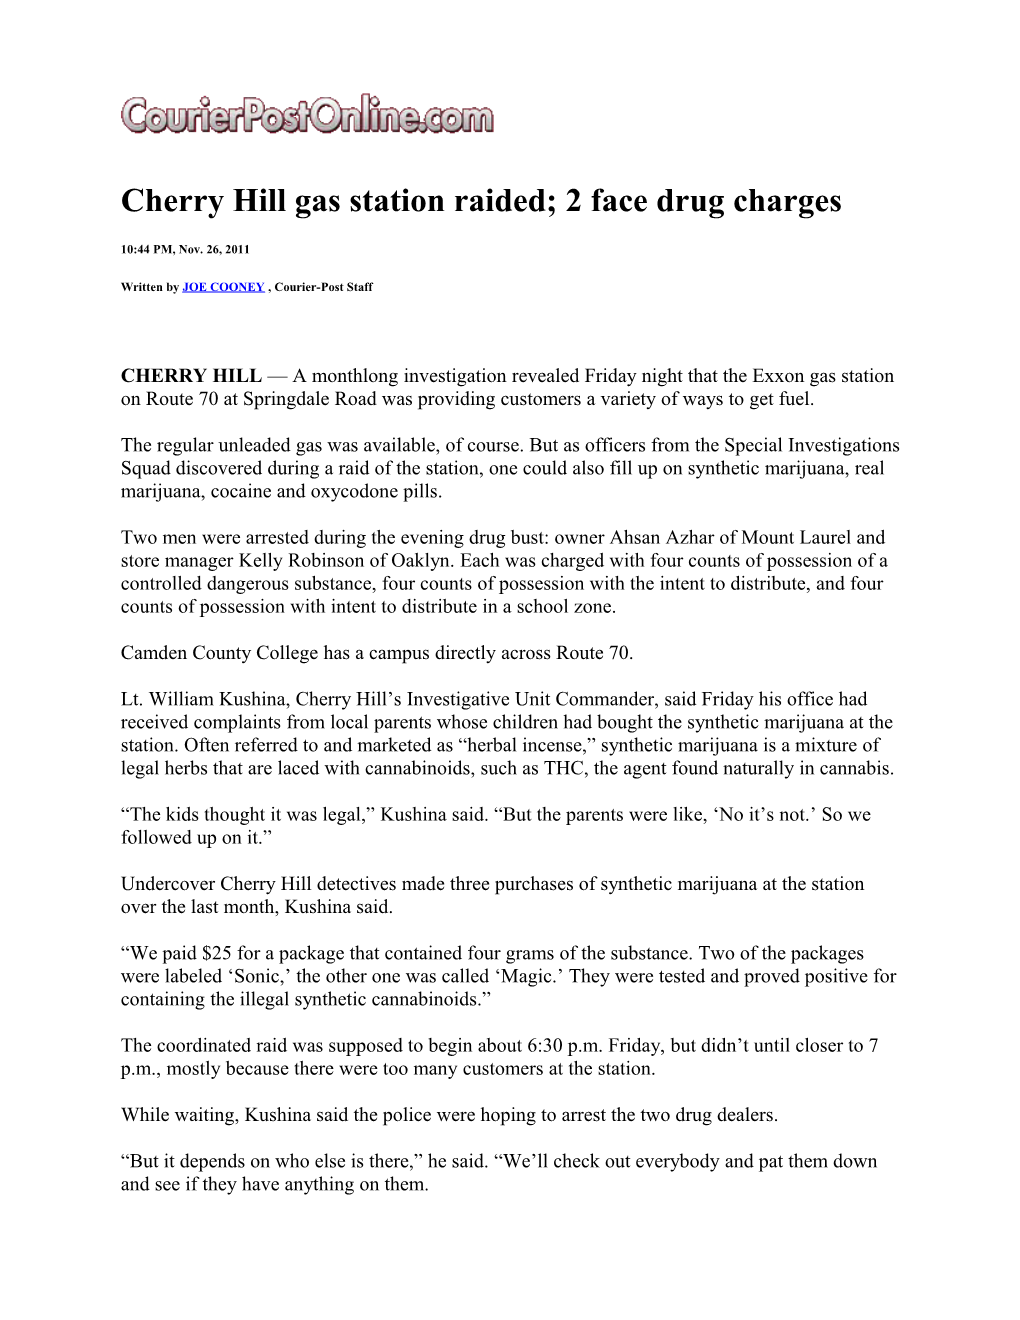 Cherry Hill Gas Station Raided; 2 Face Drug Charges